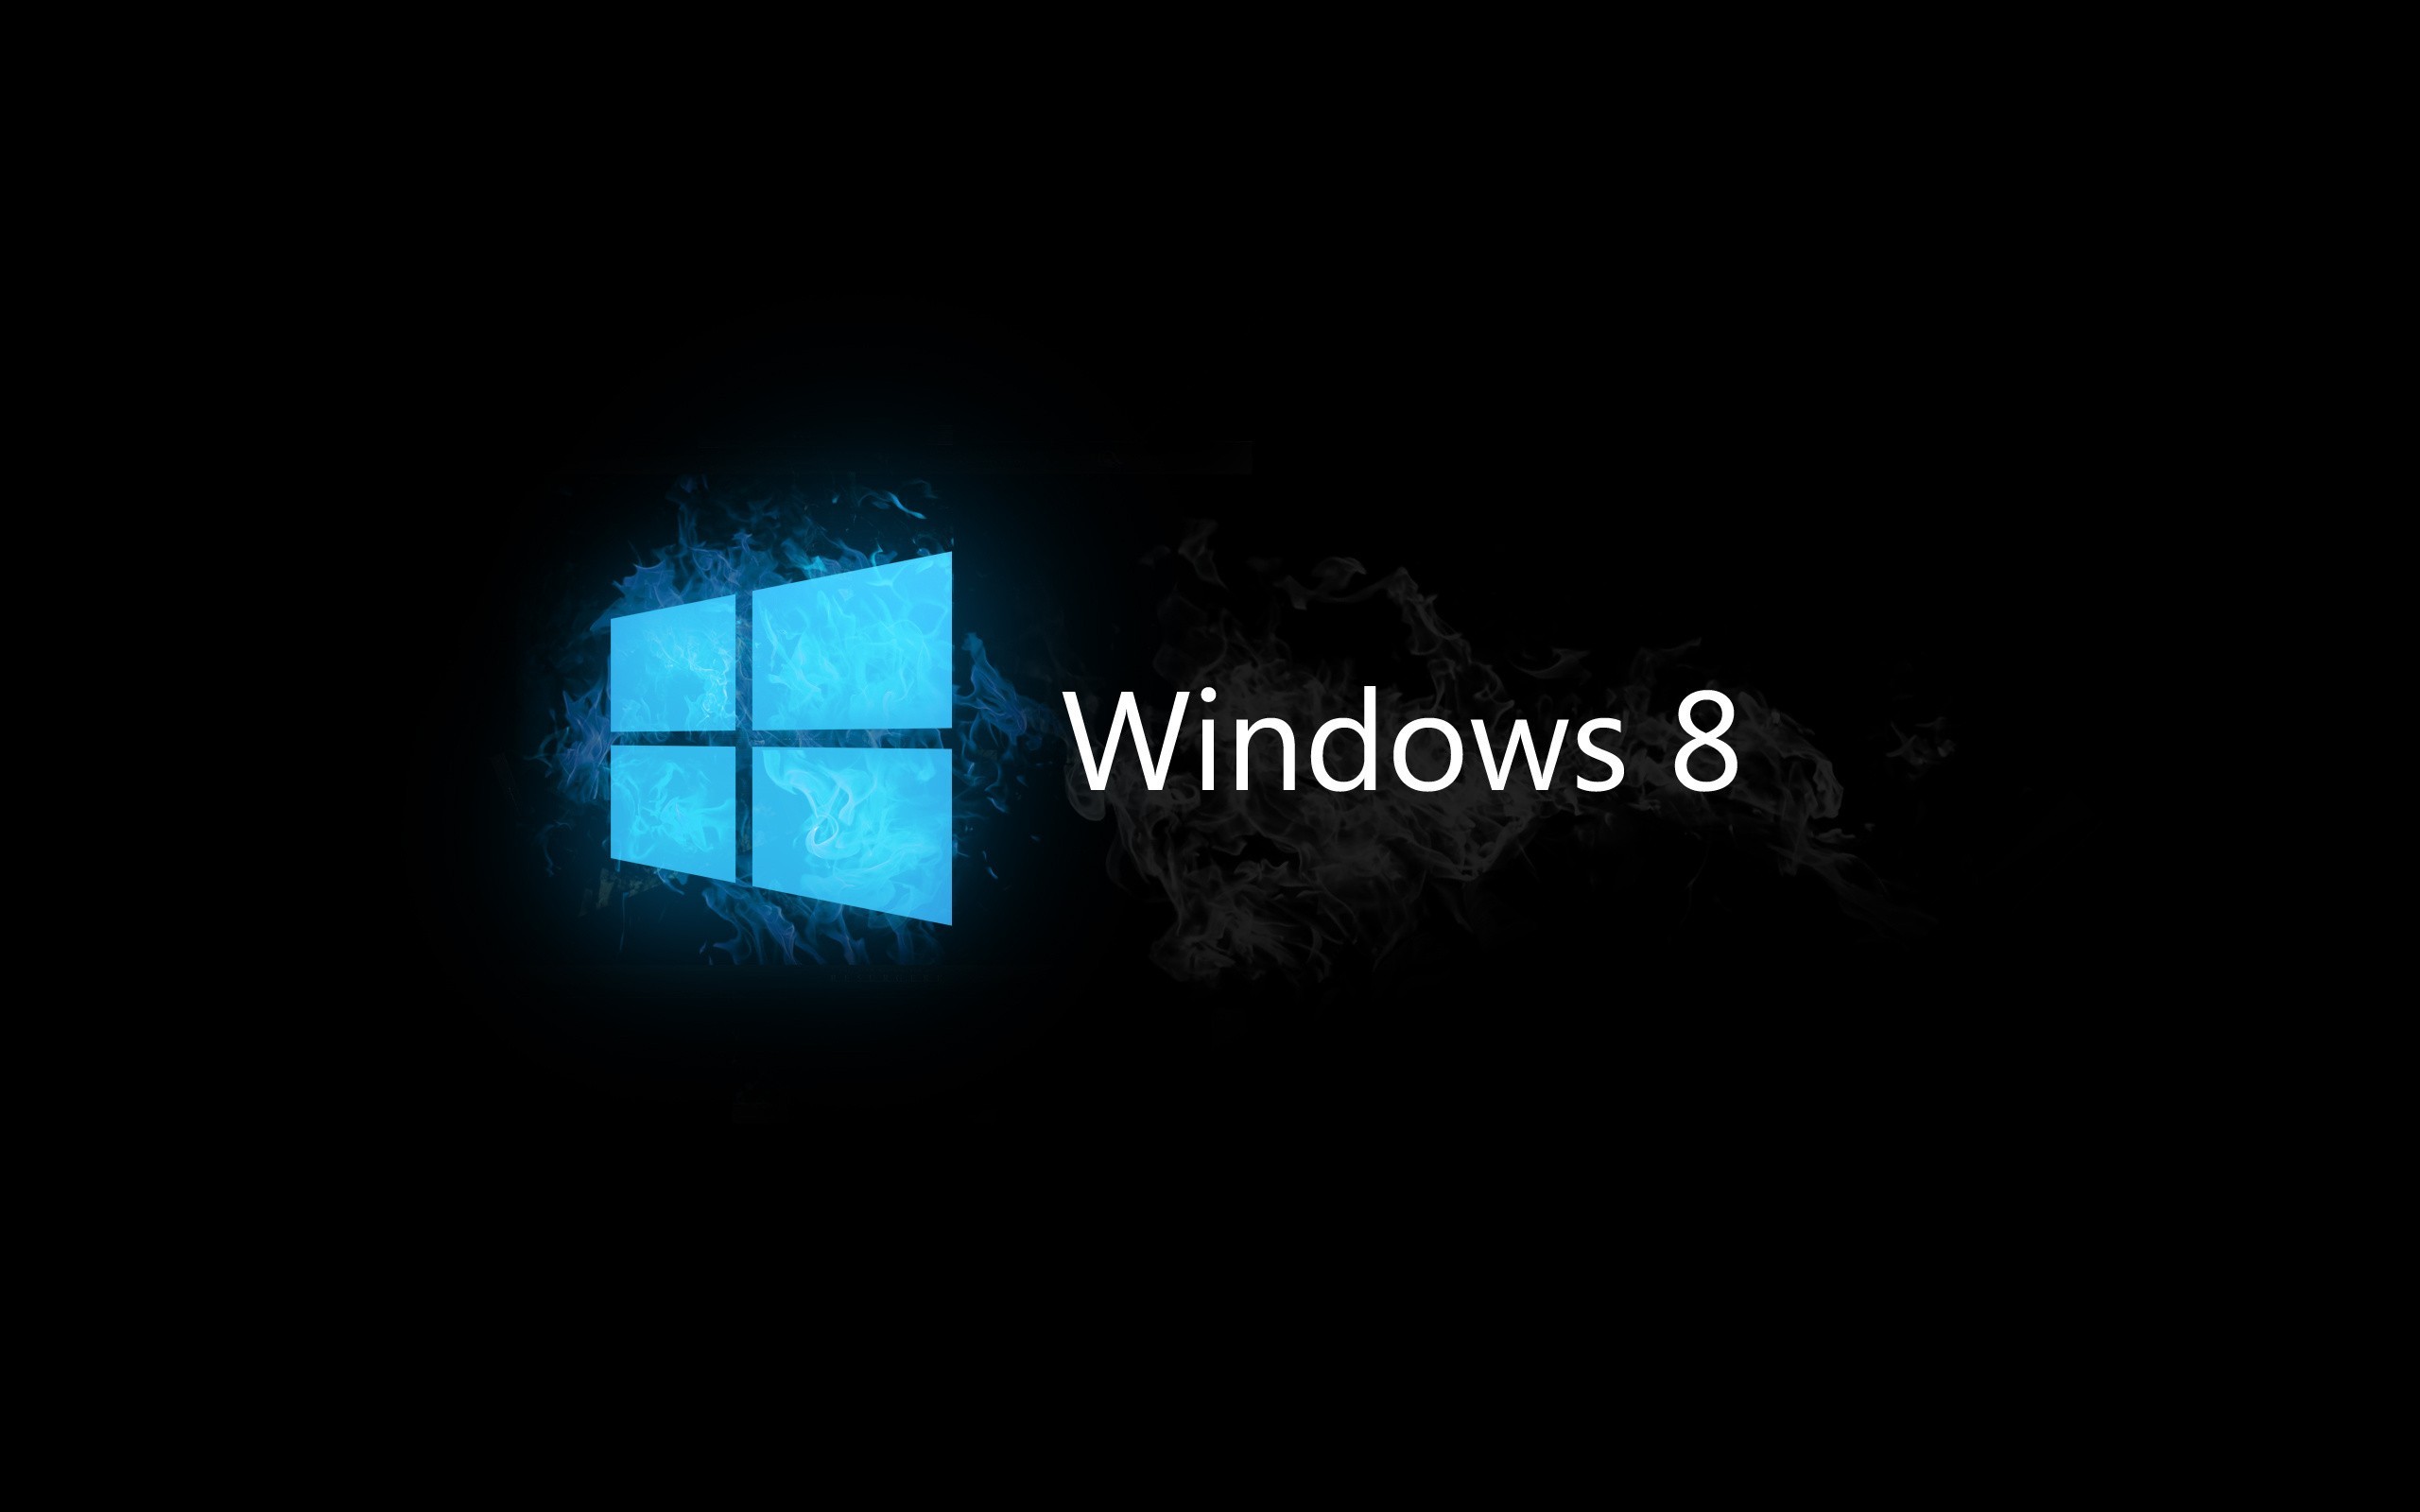 2560x1600 Windows 8 Blue wallpapers and stock photos